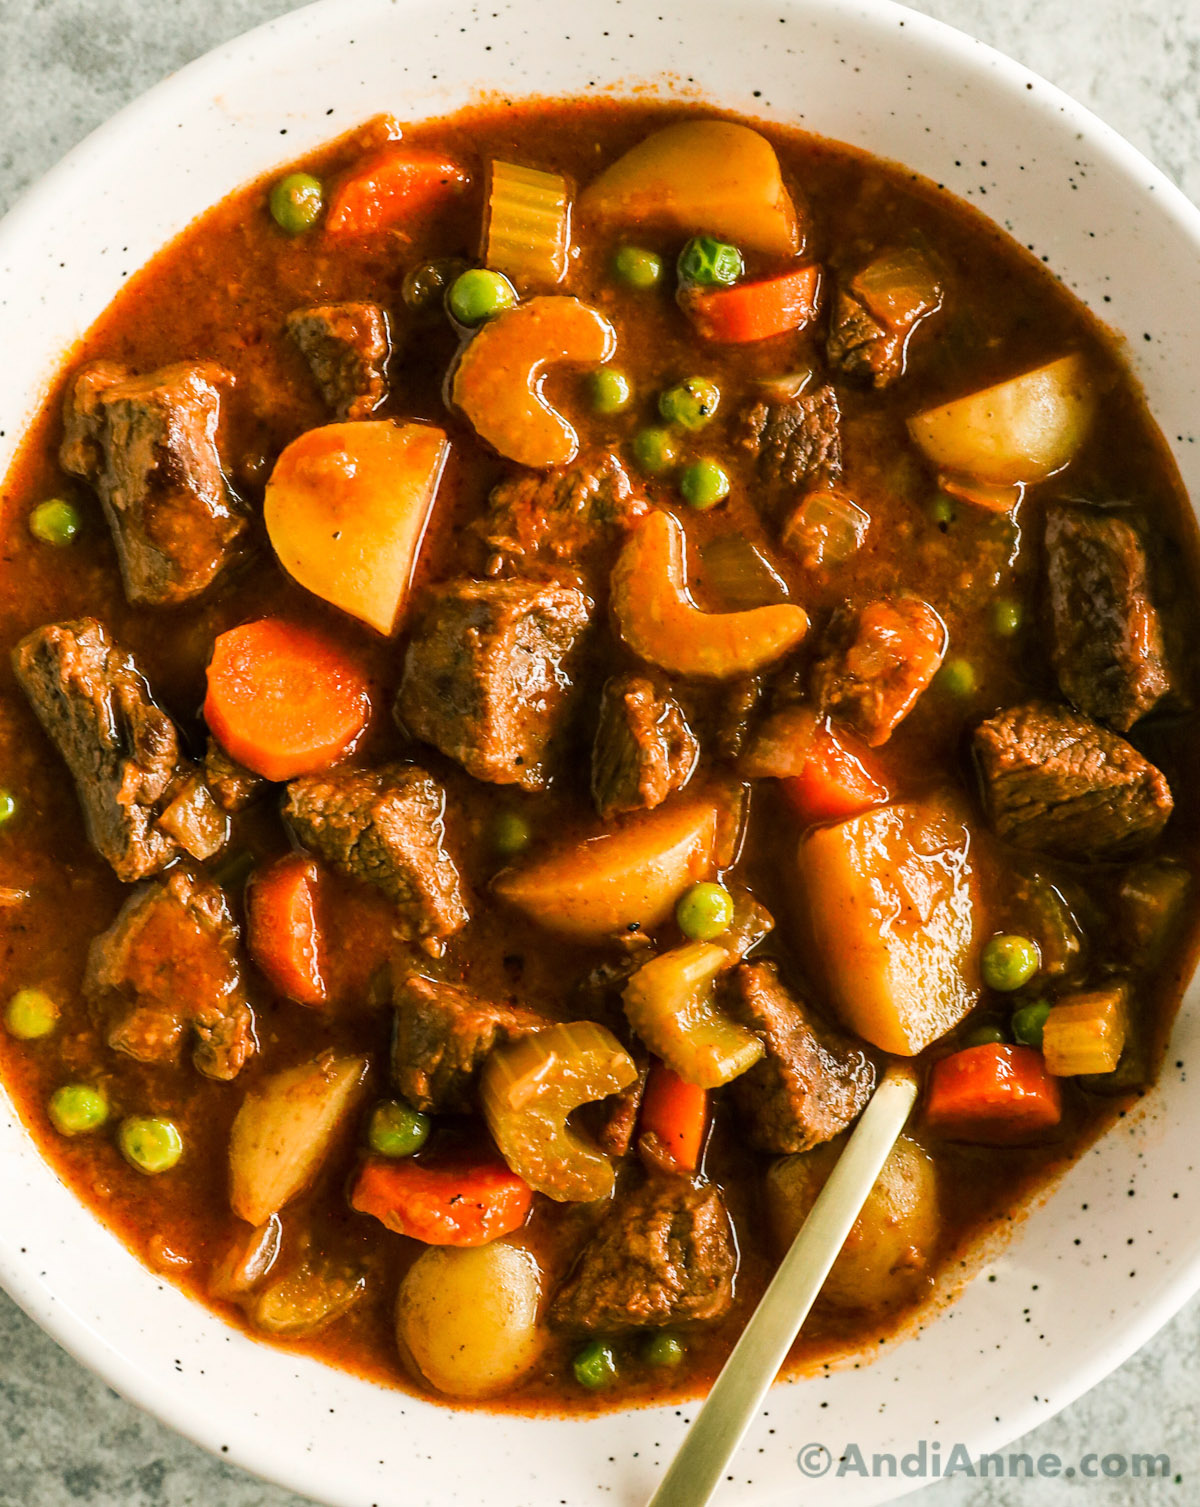 Overhead view of finished Beef stew in a bowl with a spoon.